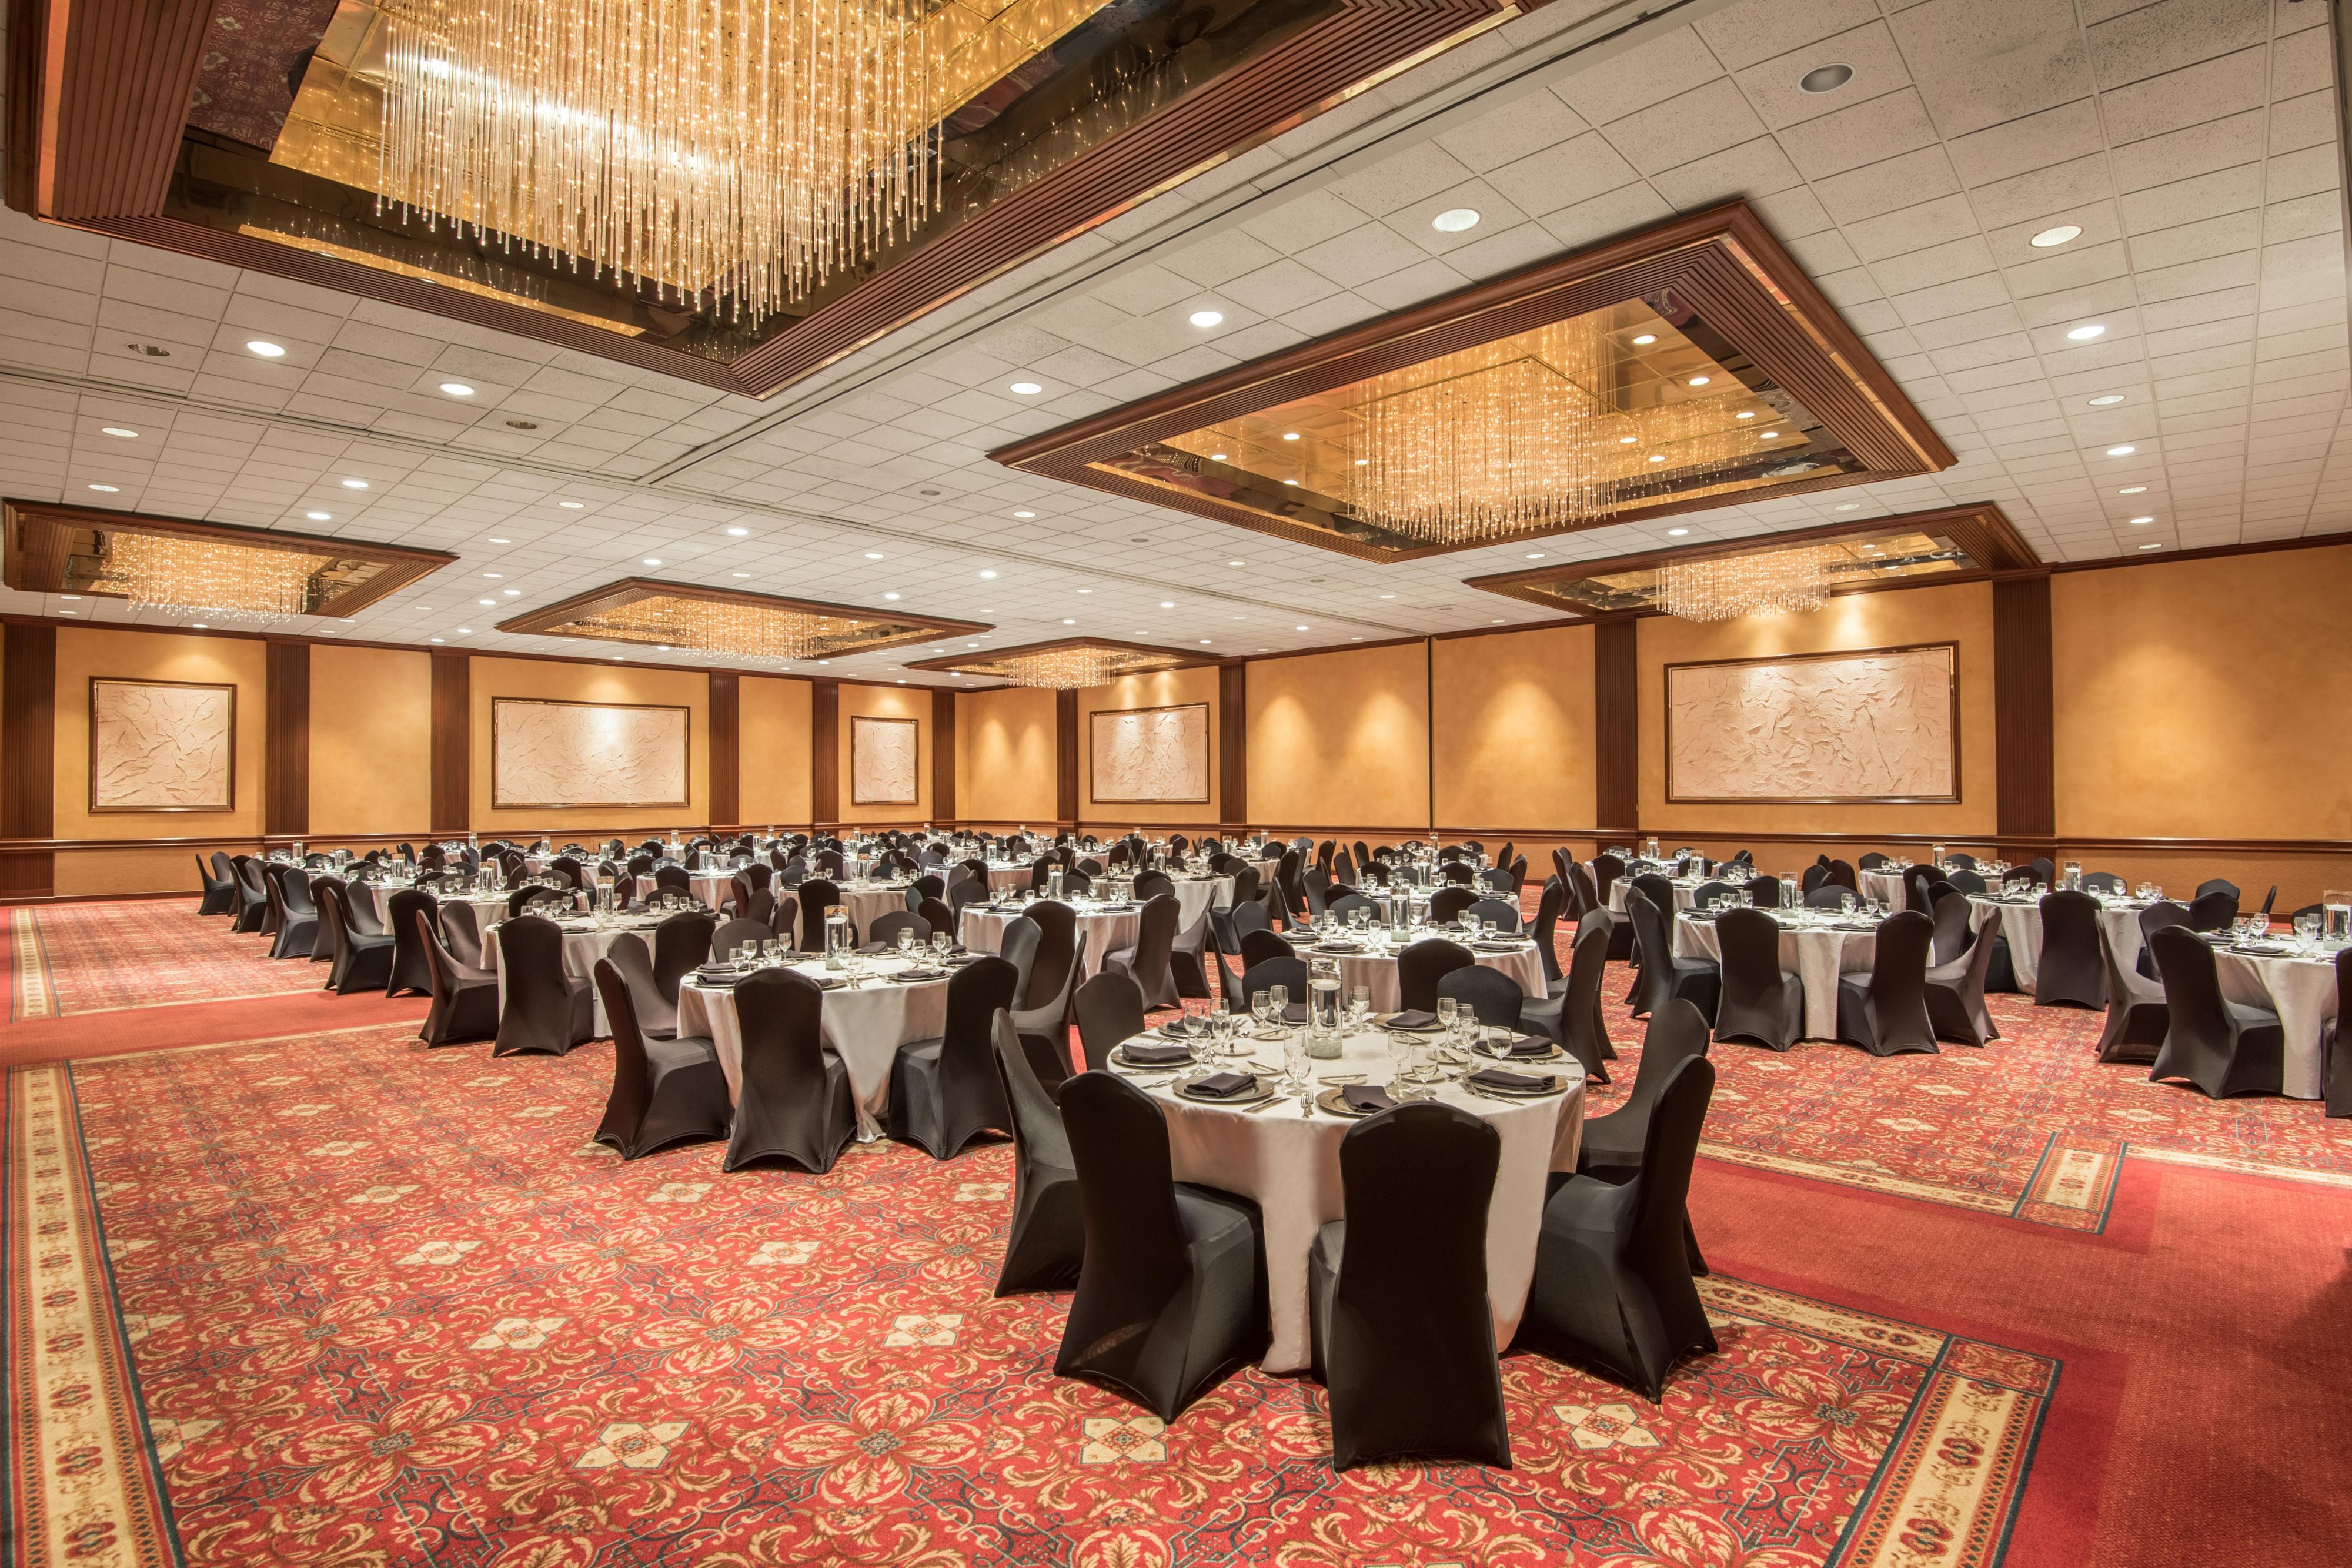 Summit Grand Ballroom can be divided into 2 separate spaces.